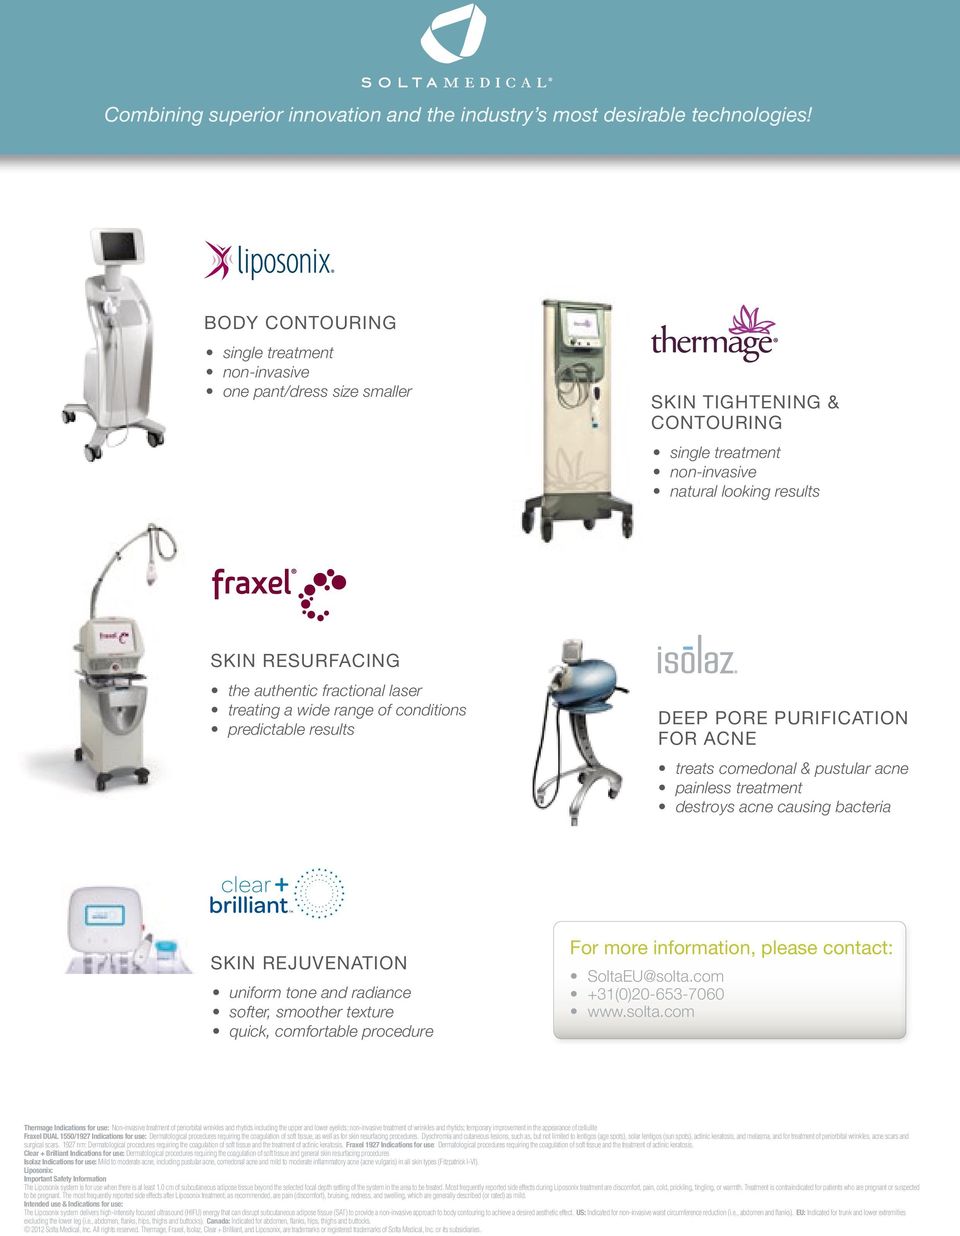 laser treating a wide range of conditions predictable results DEEP PORE PURIFICATION FOR ACNE treats comedonal & pustular acne painless treatment destroys acne causing bacteria SKIN REJUVENATION